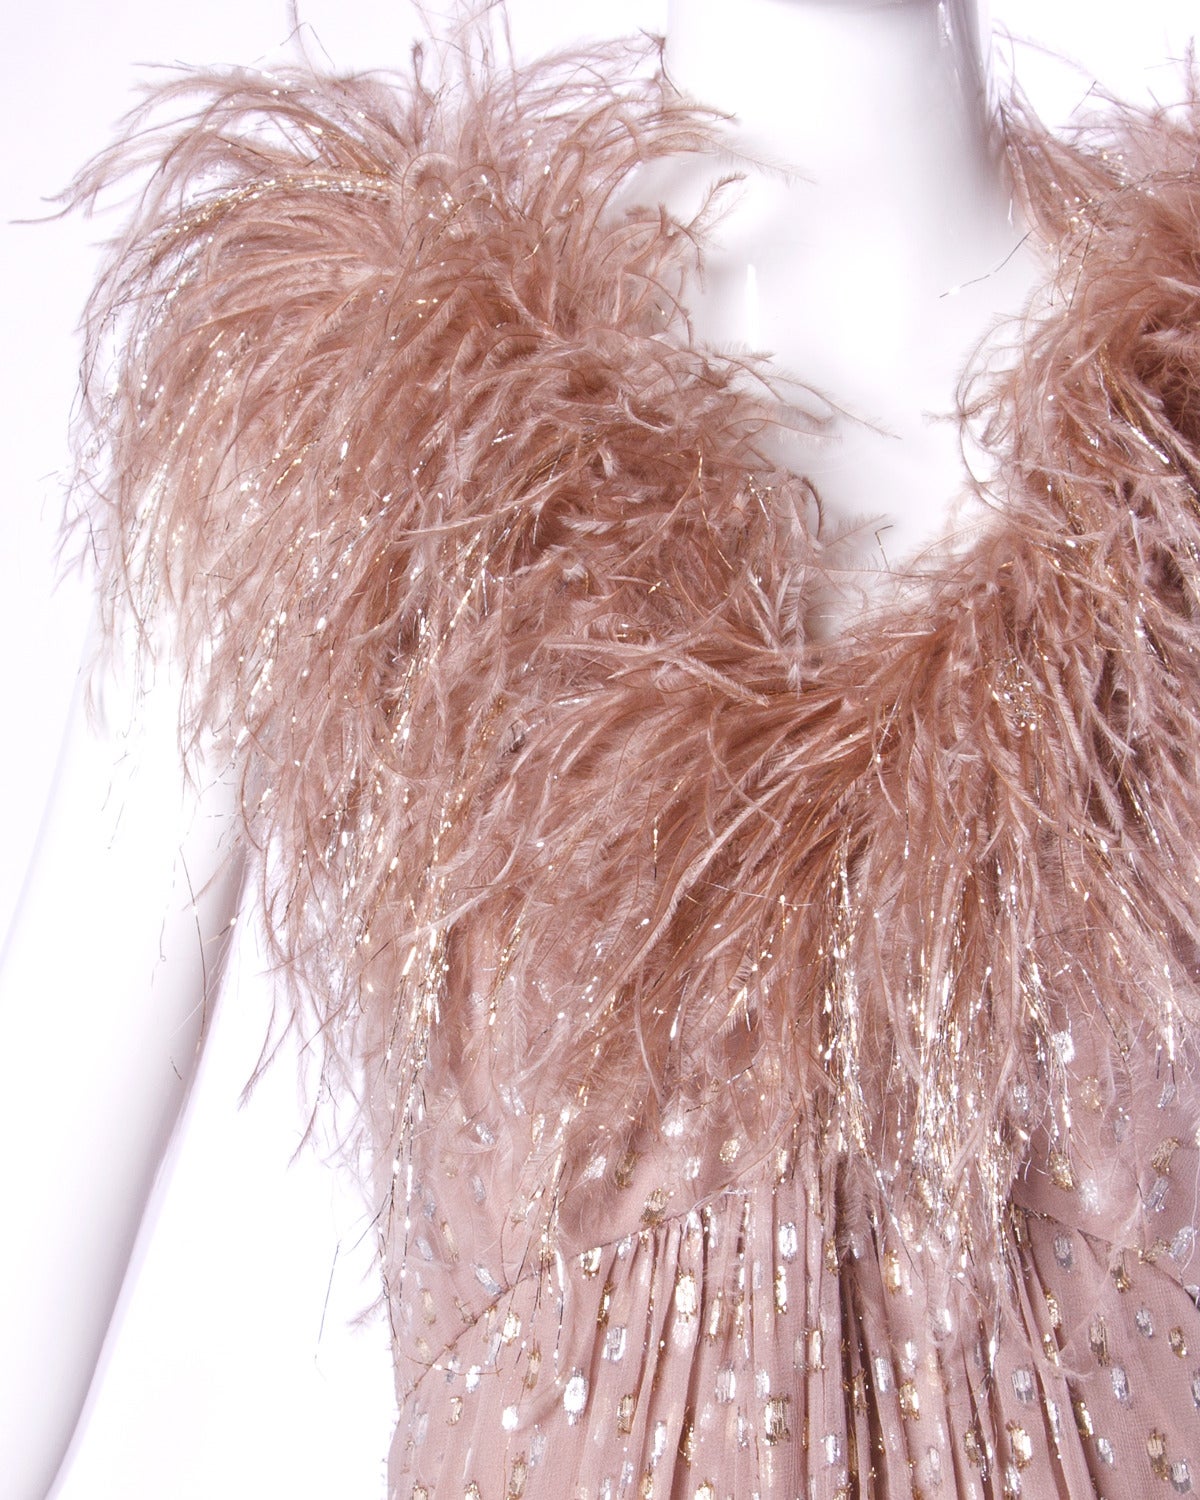 Reduced from $595. Vintage Victor Costa maxi dress in metallic-flecked nude chiffon with a matching feather neckline in the same colors. 

Details:

Fully Lined
Back Zip and Hook Closure
Estimated Size: M-L
Color: Taupe/ Gold/ Silver
Label: